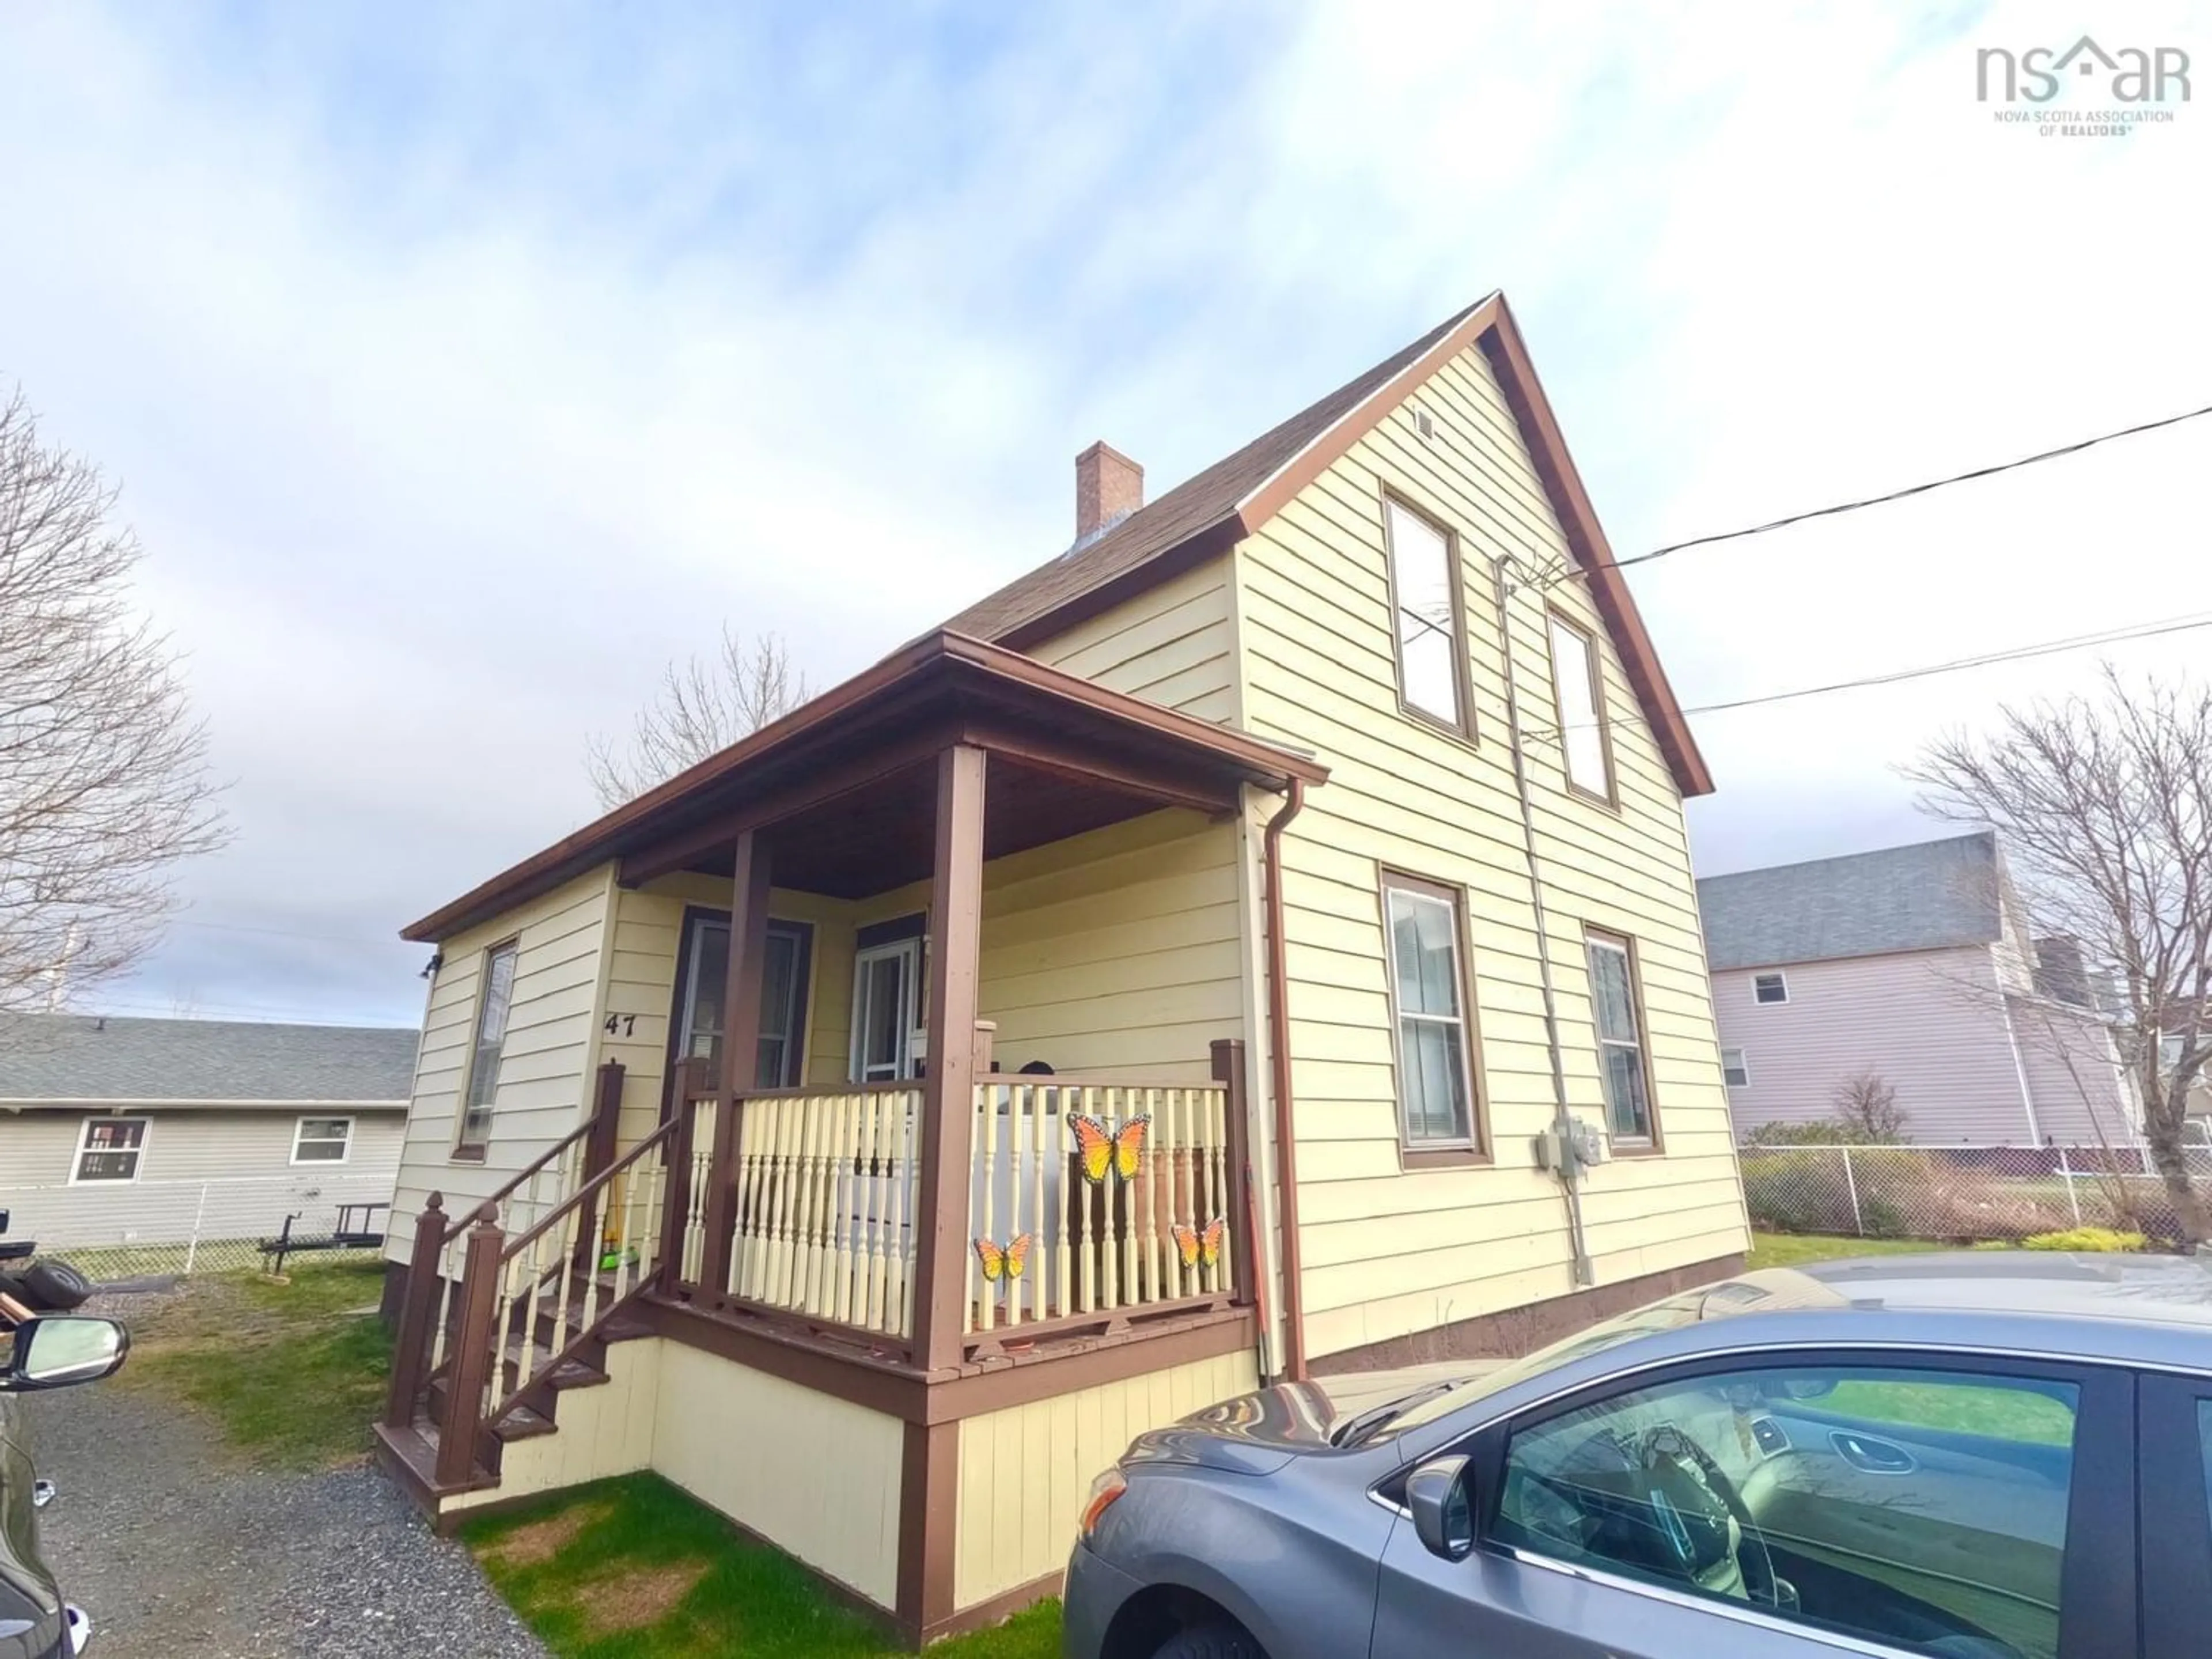 Frontside or backside of a home for 47 Lower Mclean St, Glace Bay Nova Scotia B1A 2K5